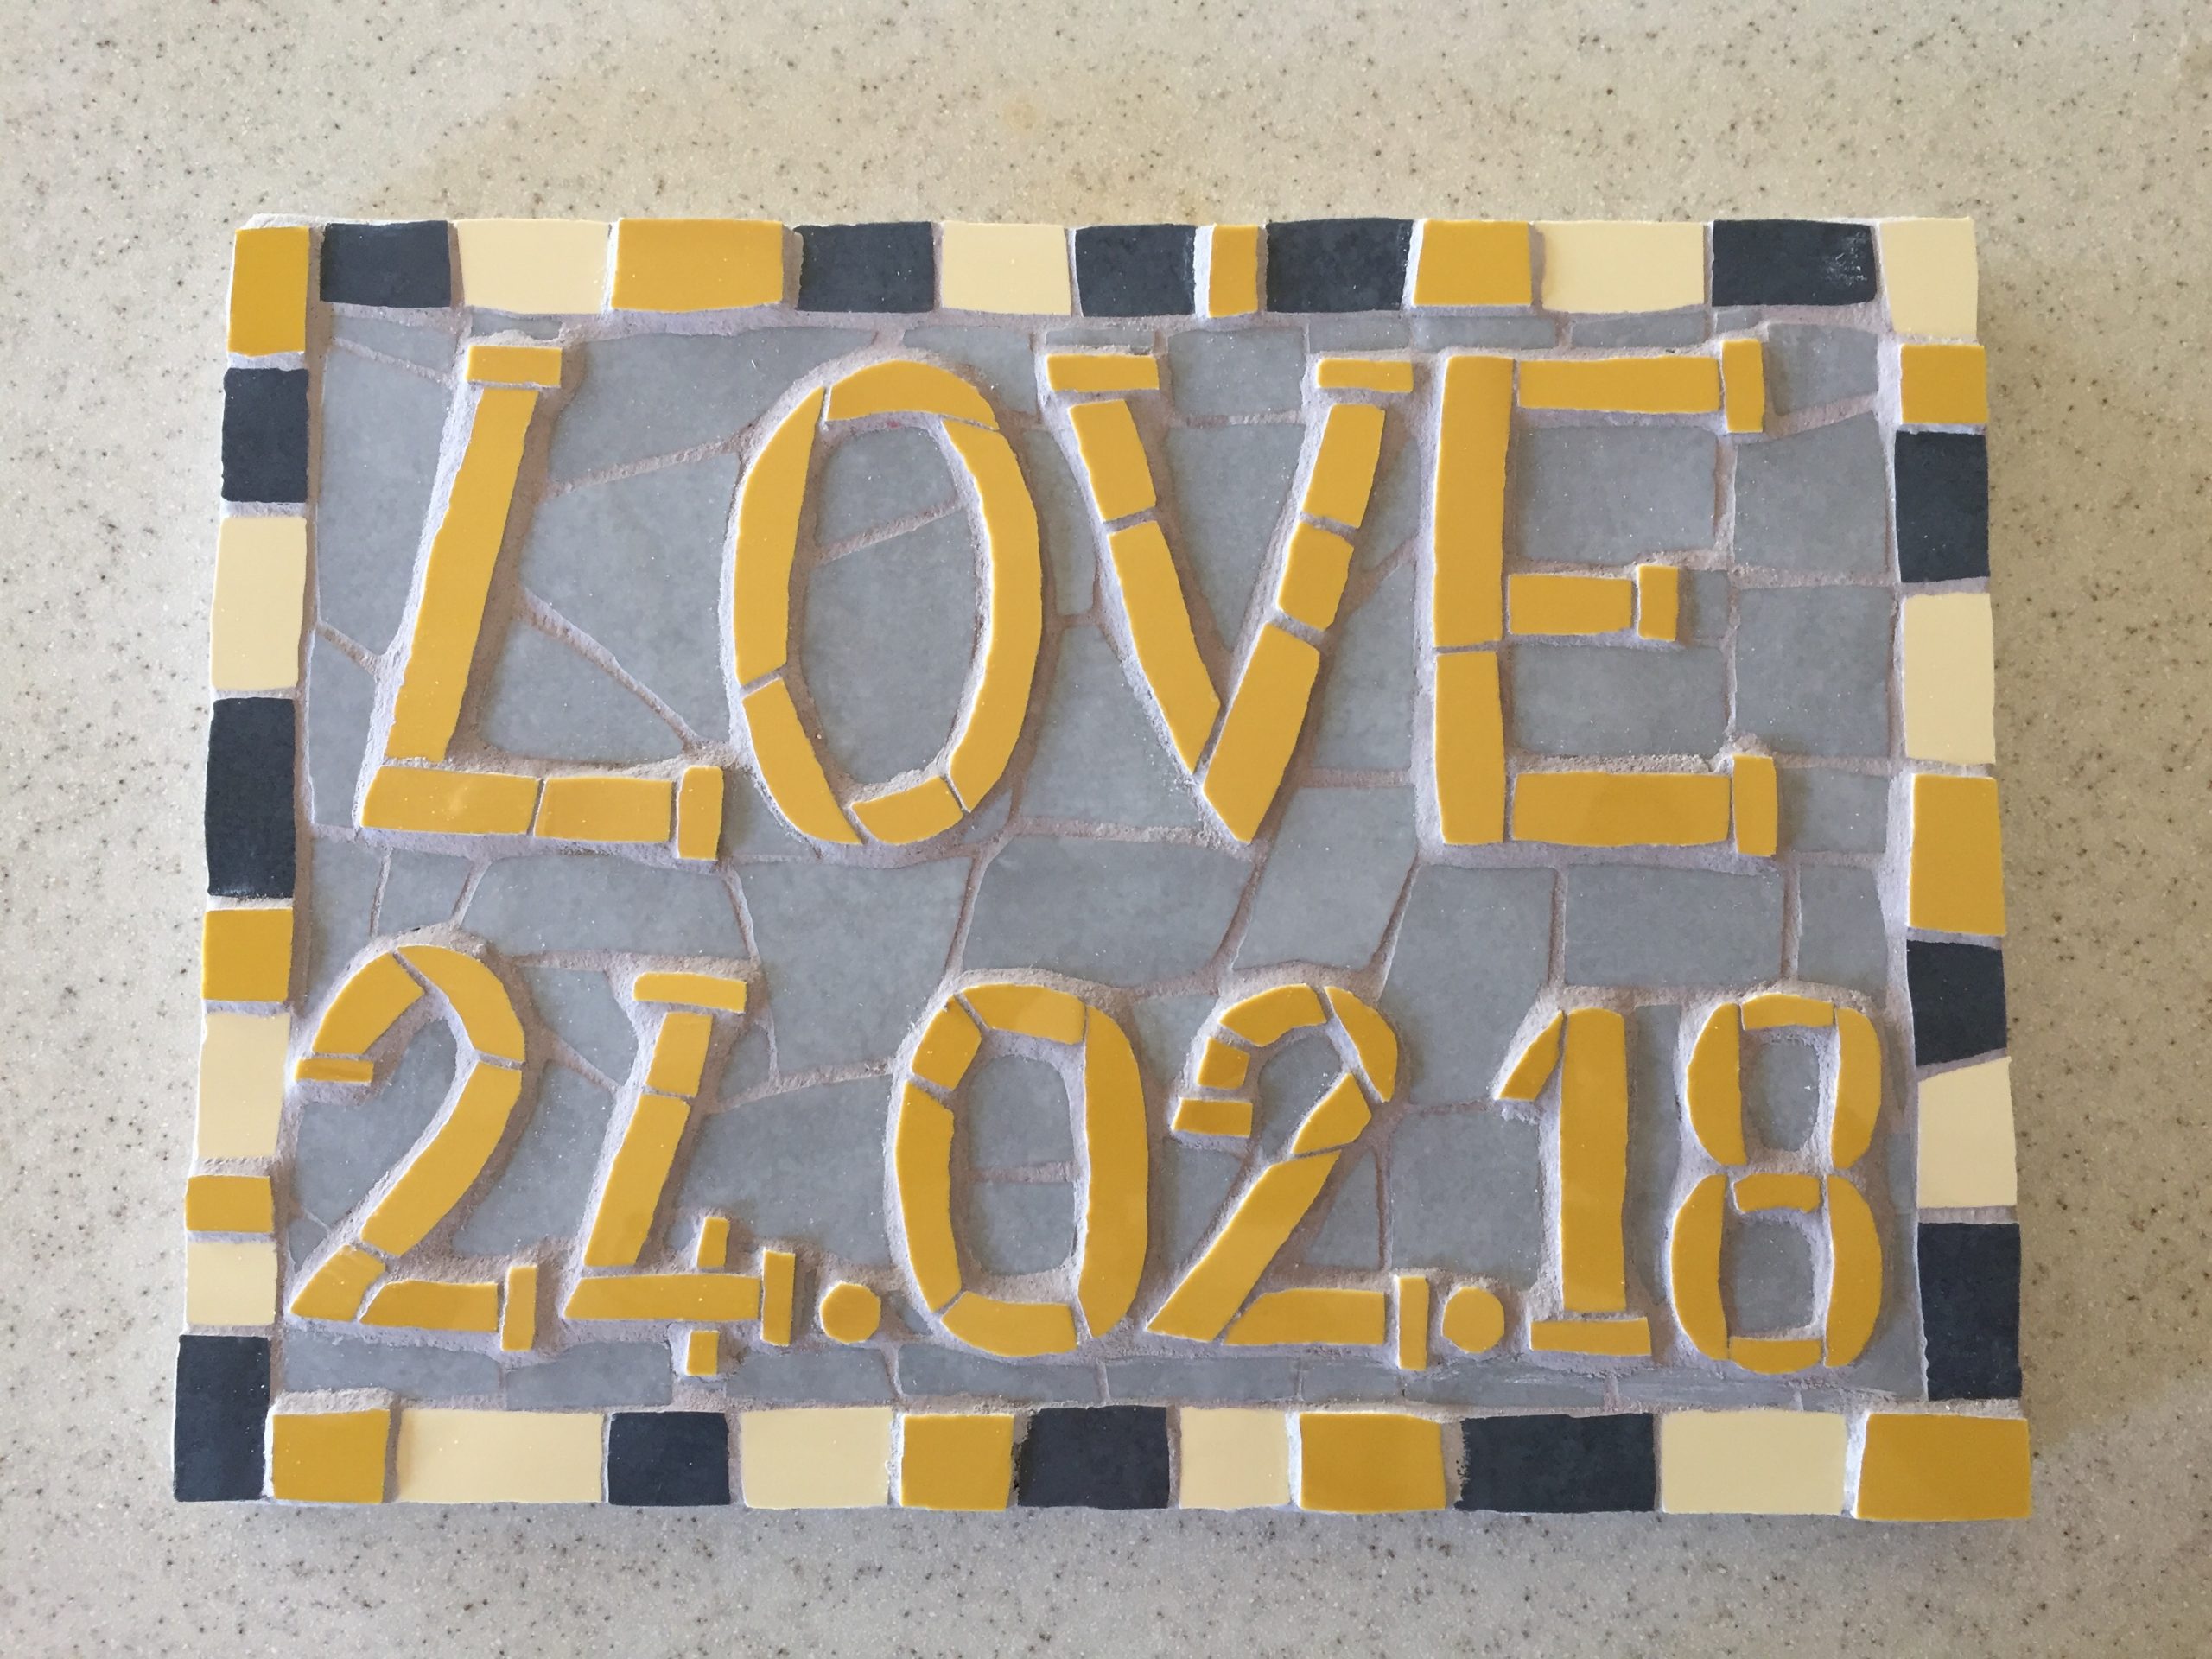 Original mosaic wedding gifts are back on the agenda!